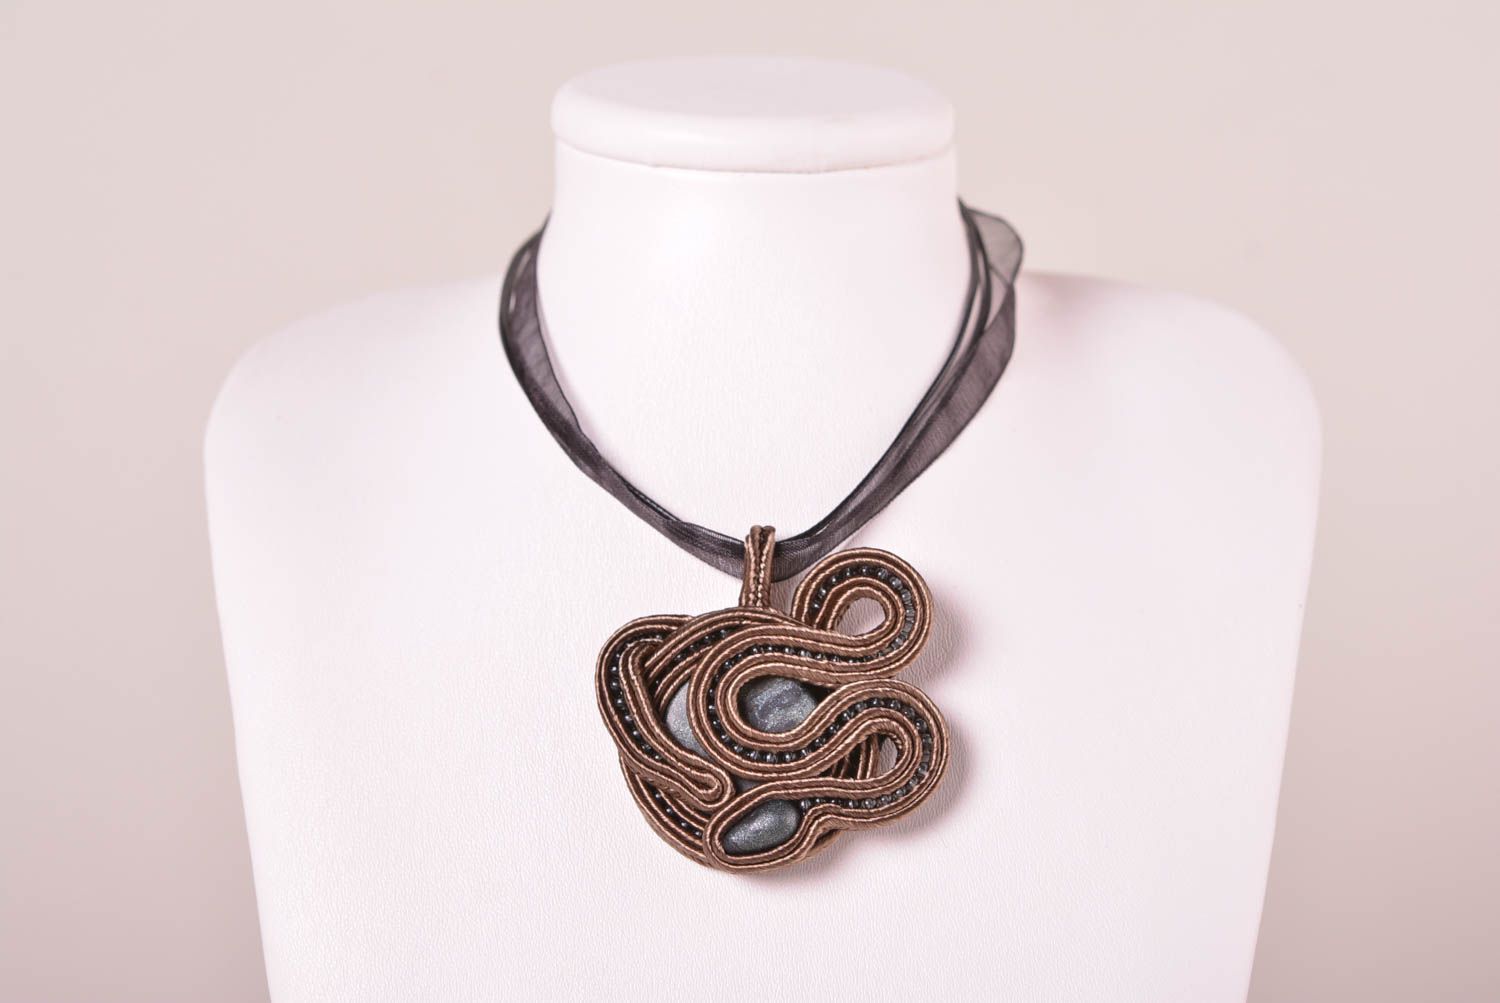 Handcrafted pendant necklace soutache jewelry designer accessories for women photo 2